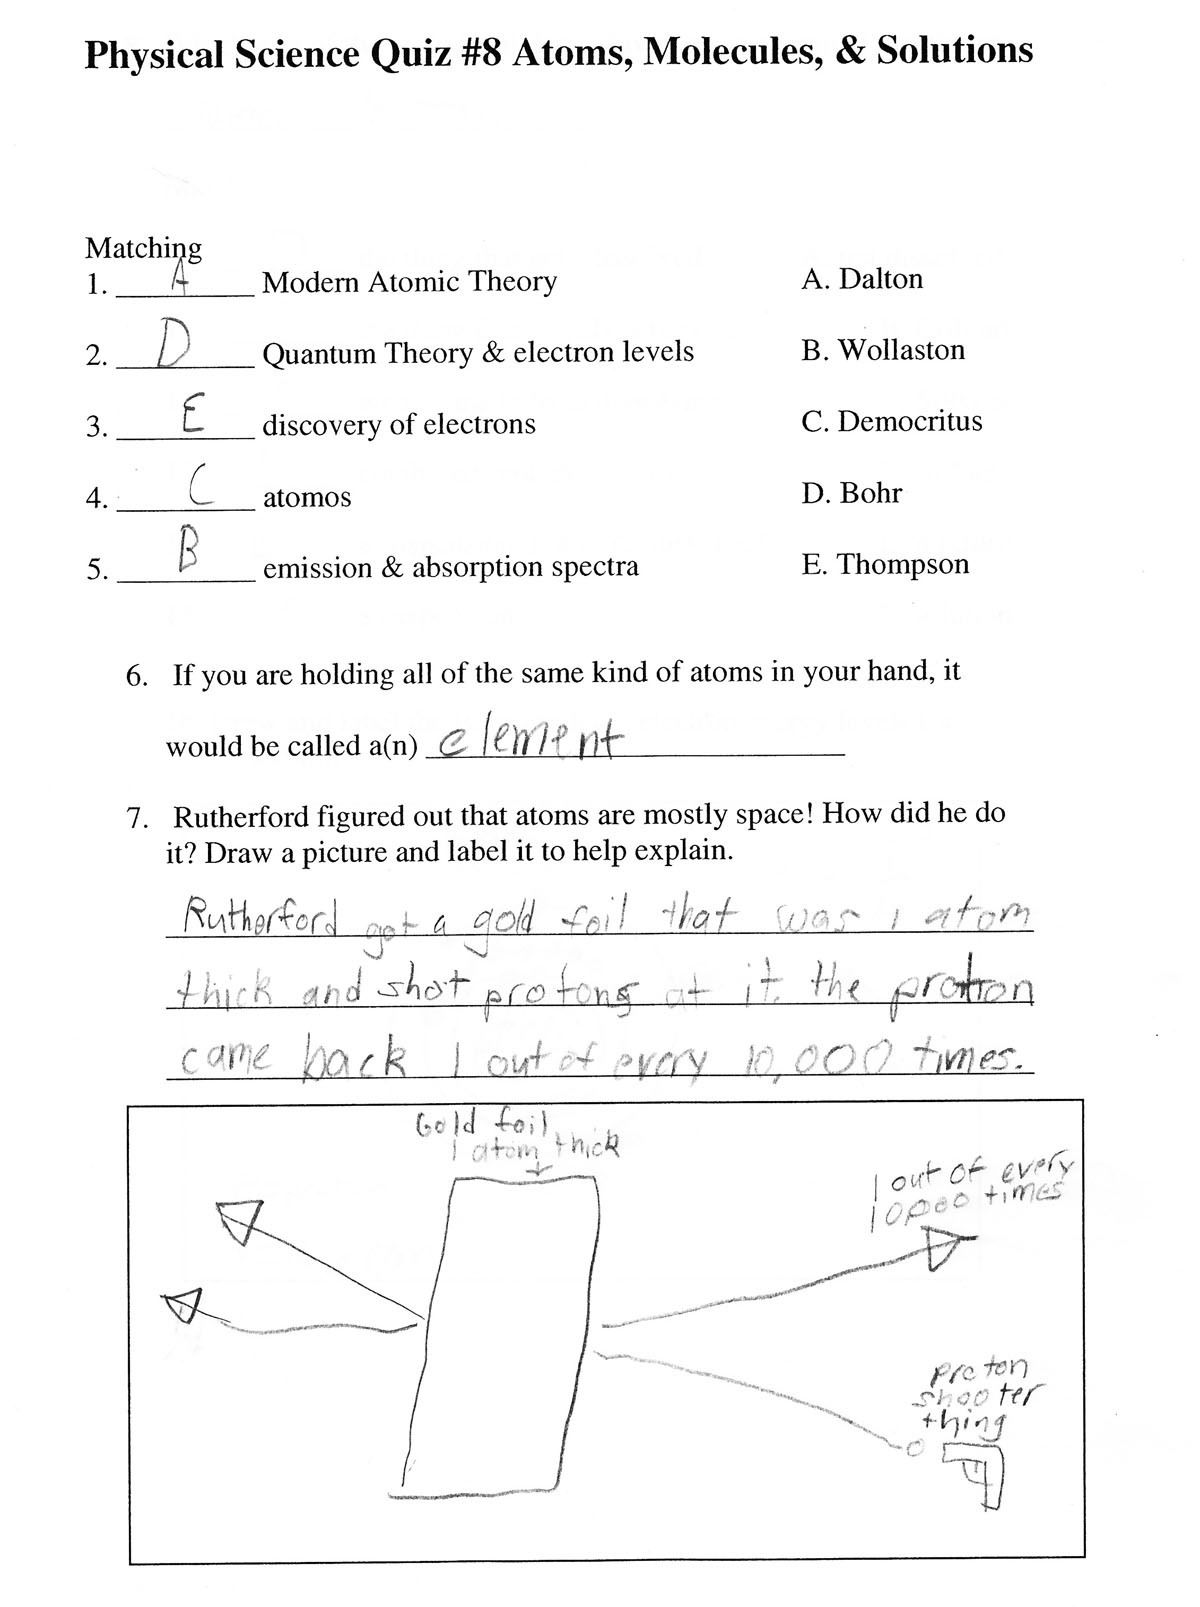 What are some sixth-grade science questions?